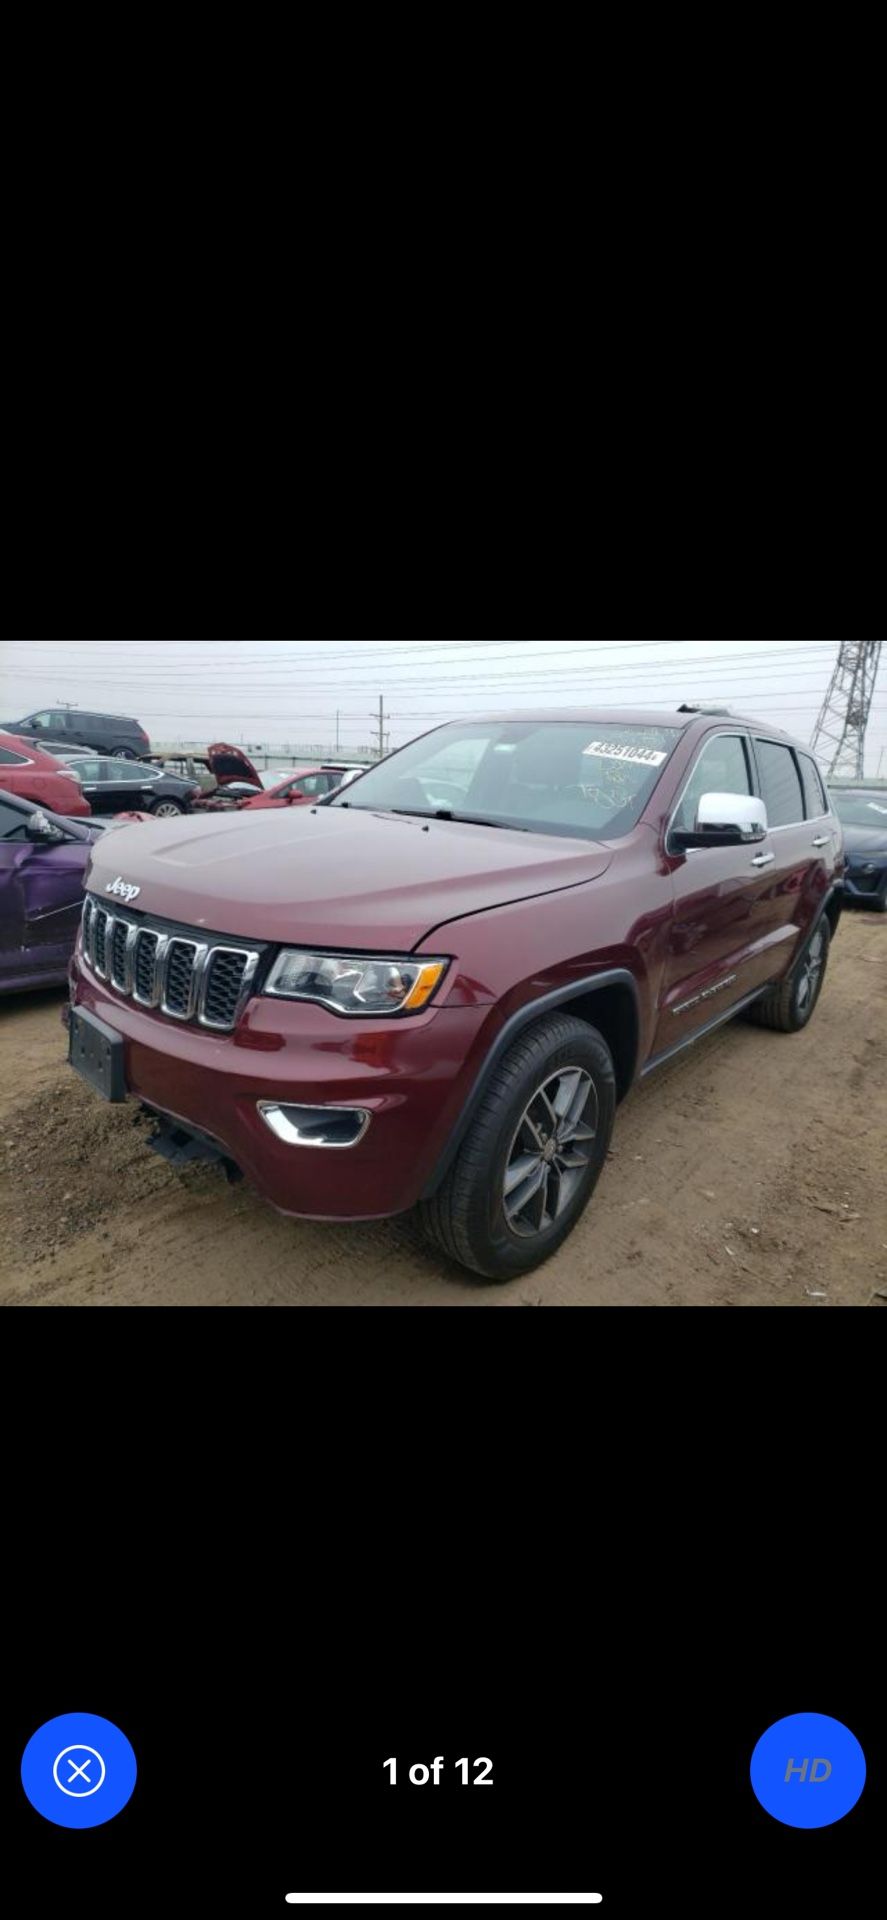 Jeep Cherokee 2017 Parts Available